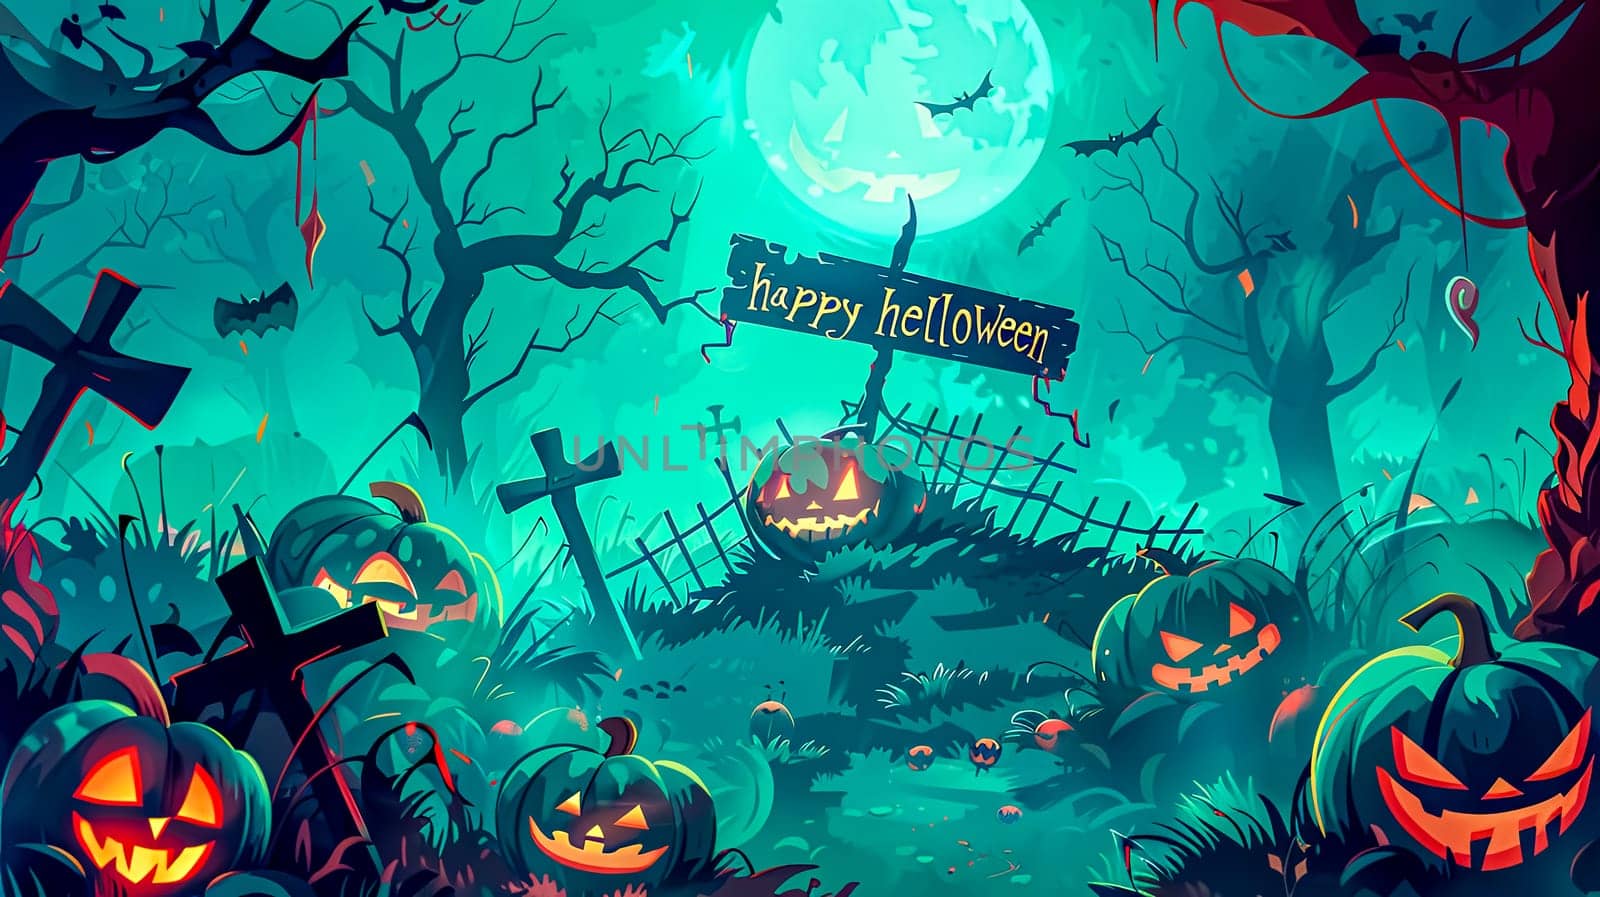 Vibrant illustration of a spooky forest with jack-o'-lanterns, full moon, and happy halloween sign by Edophoto